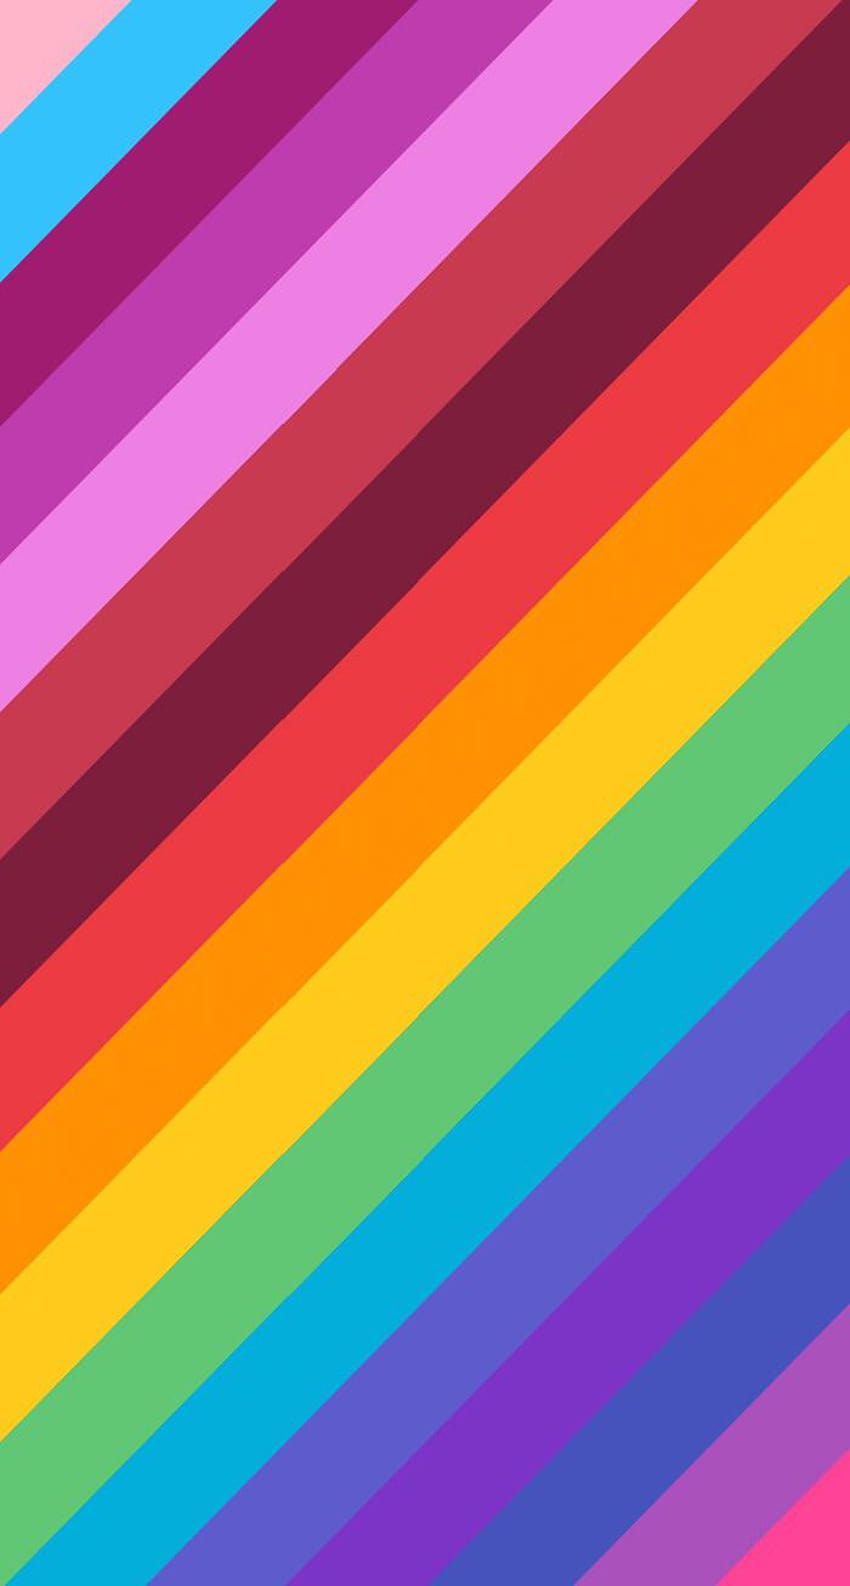 I edited Twitch's pride logo to make a for your phone, pride phone HD phone wallpaper